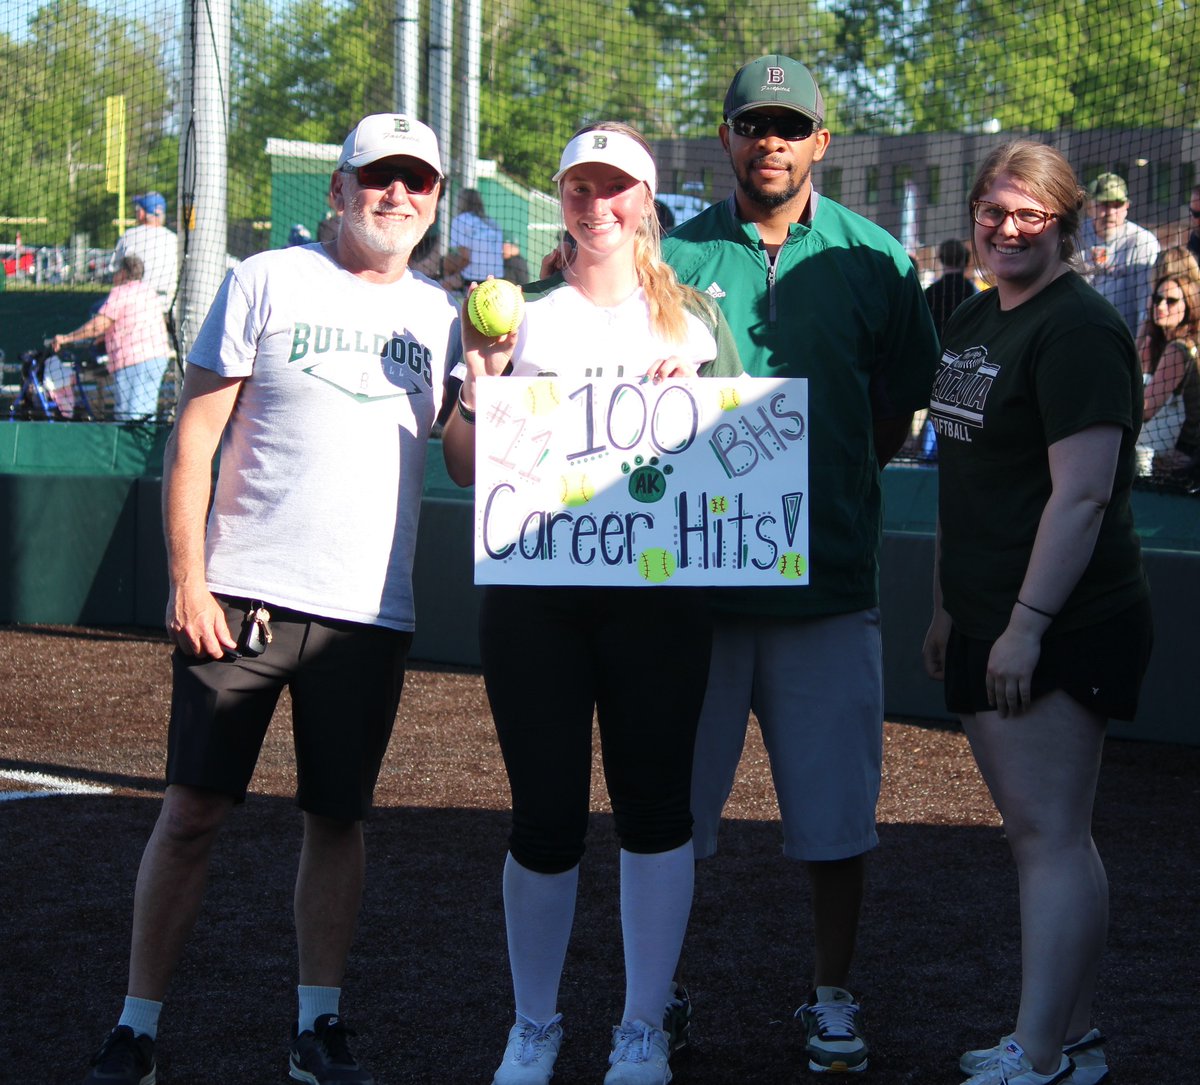 Congratulations to Aerianna King who collected her 100th career hit yesterday!  #BulldogPride